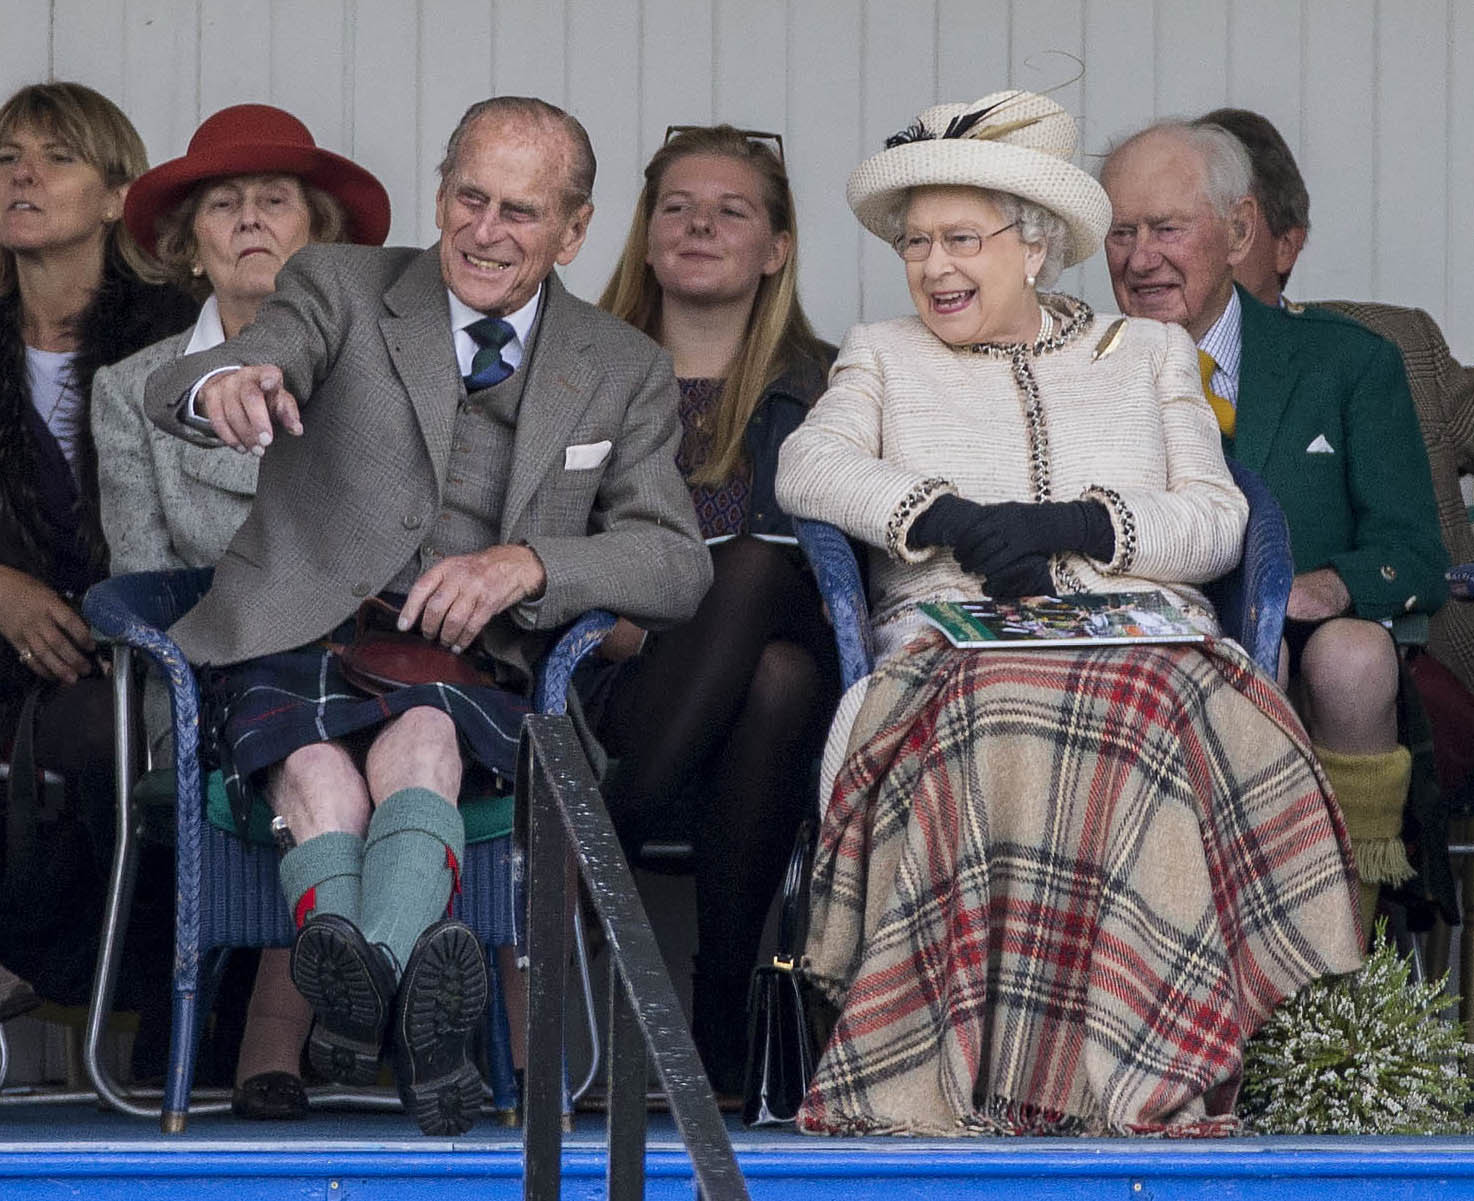 <p>An incredible 67 years later, Prince Philip and Queen Elizabeth II were side by side again, this time to watch the children's sack race at the Braemar Highland Gathering in Scotland on Sept. 6, 2014.</p>